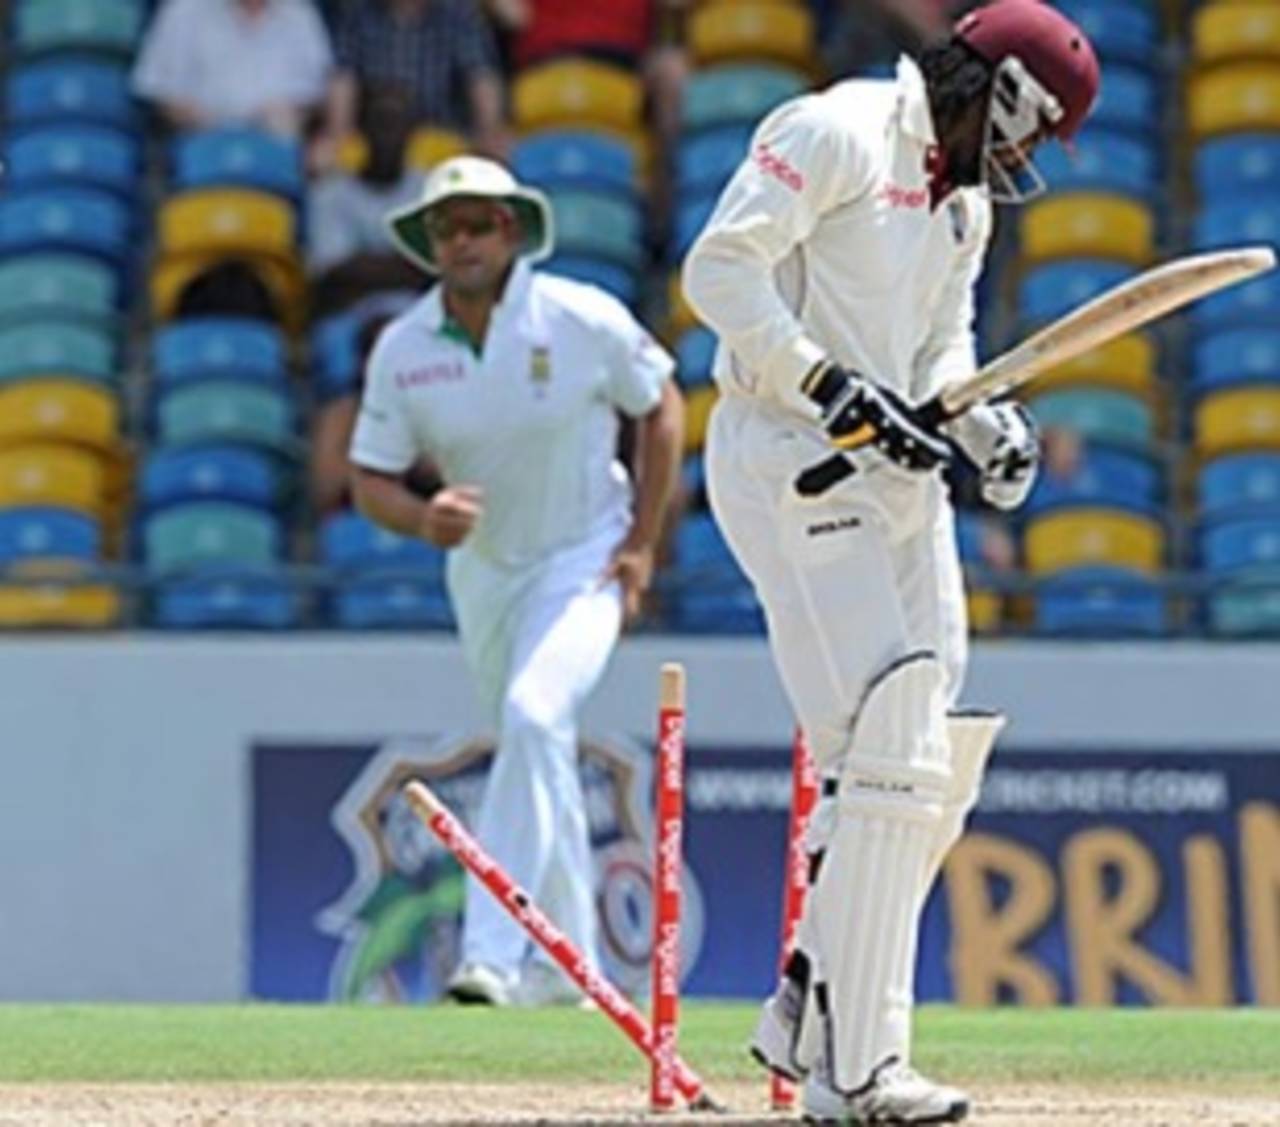 Chris Gayle was bowled by Dale Steyn, West Indies v South Africa, 3rd Test, Barbados, 1st day, June 26, 2010